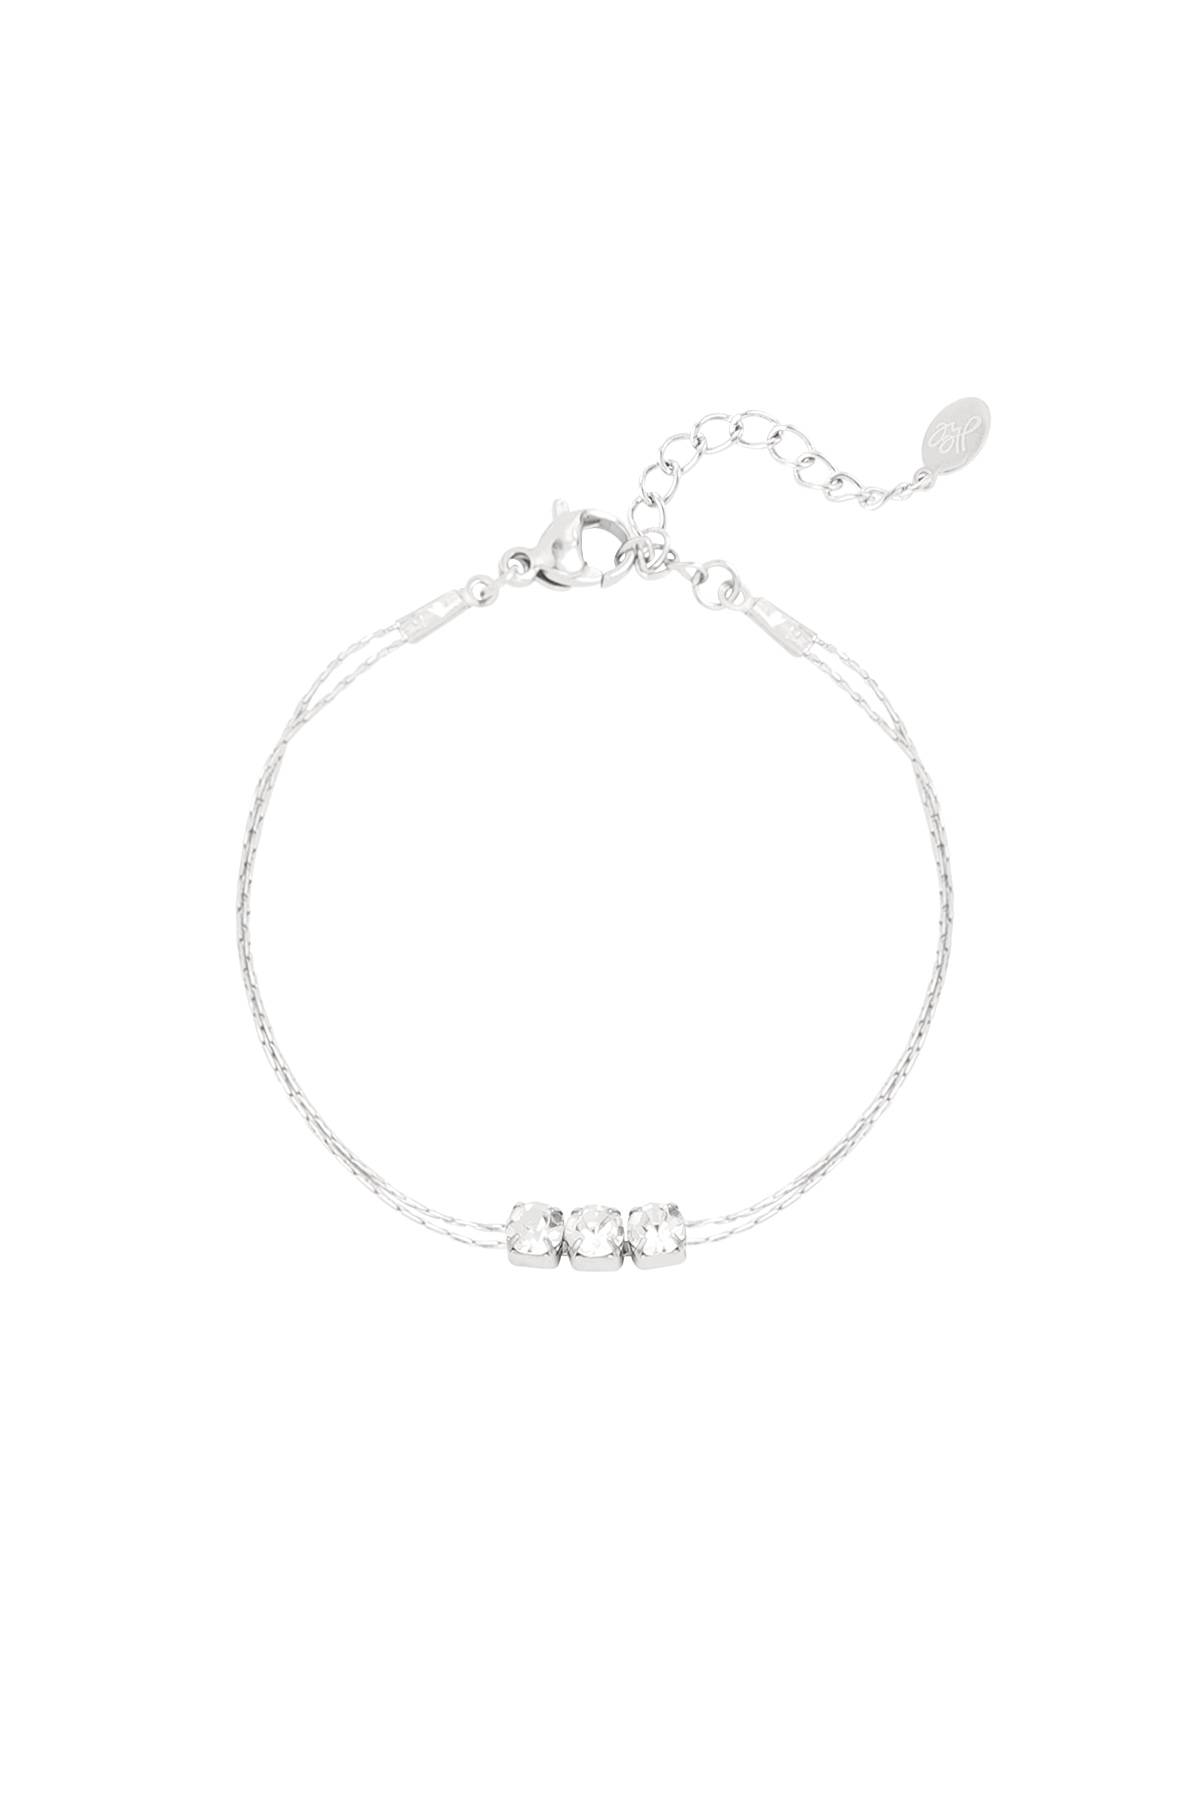 Bracelet silver with stone - white h5 